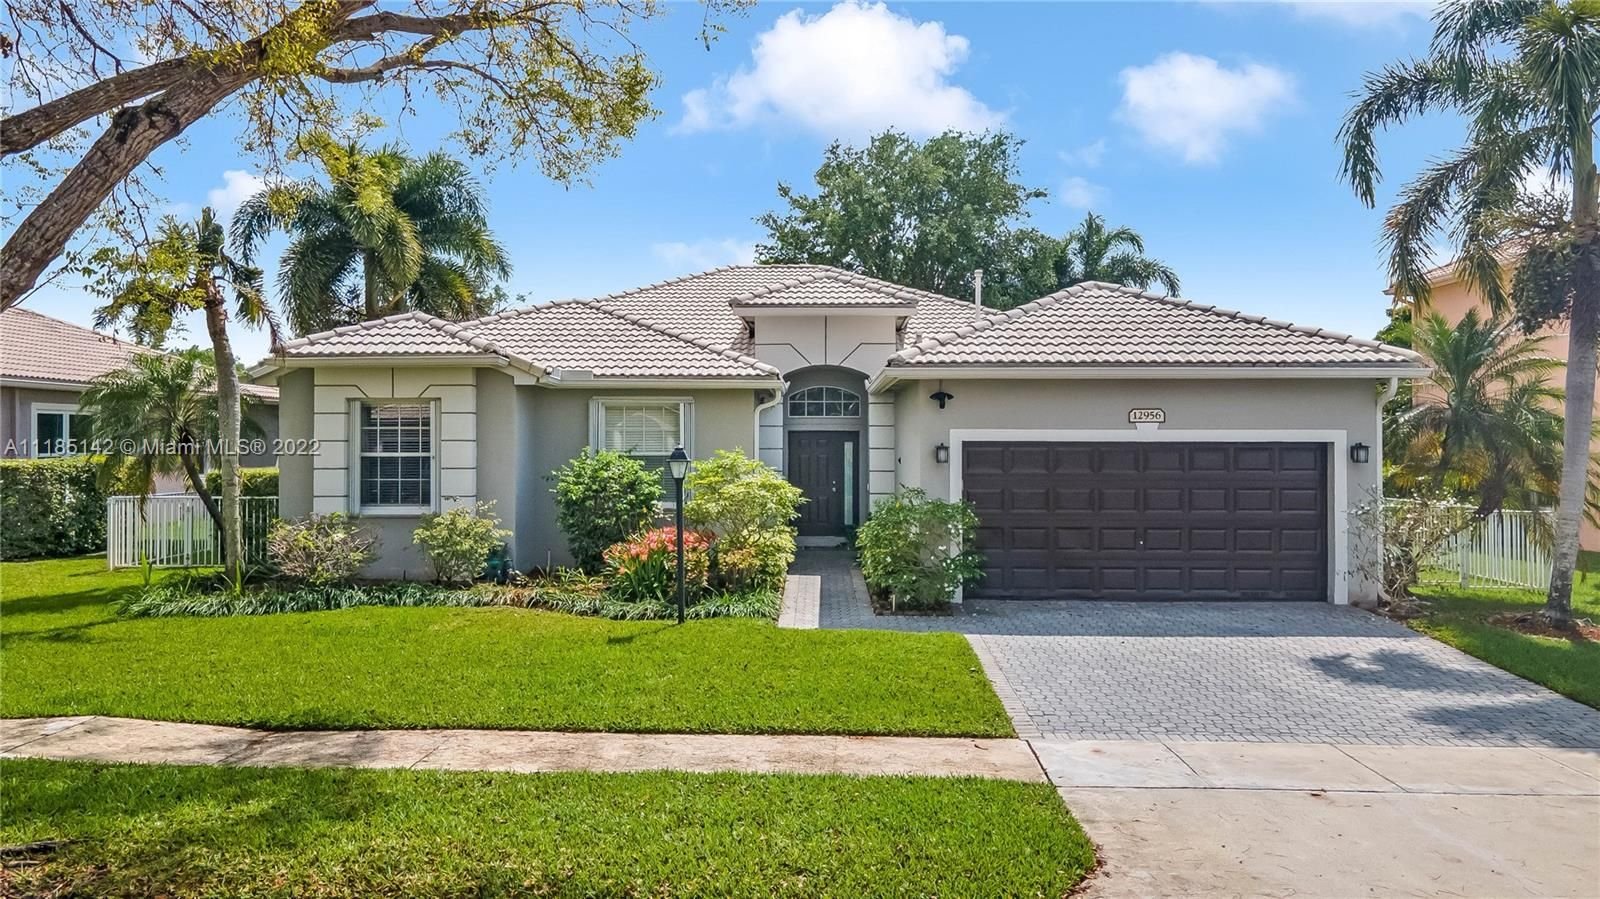 Real estate property located at 12956 18th Mnr, Broward County, Pembroke Pines, FL